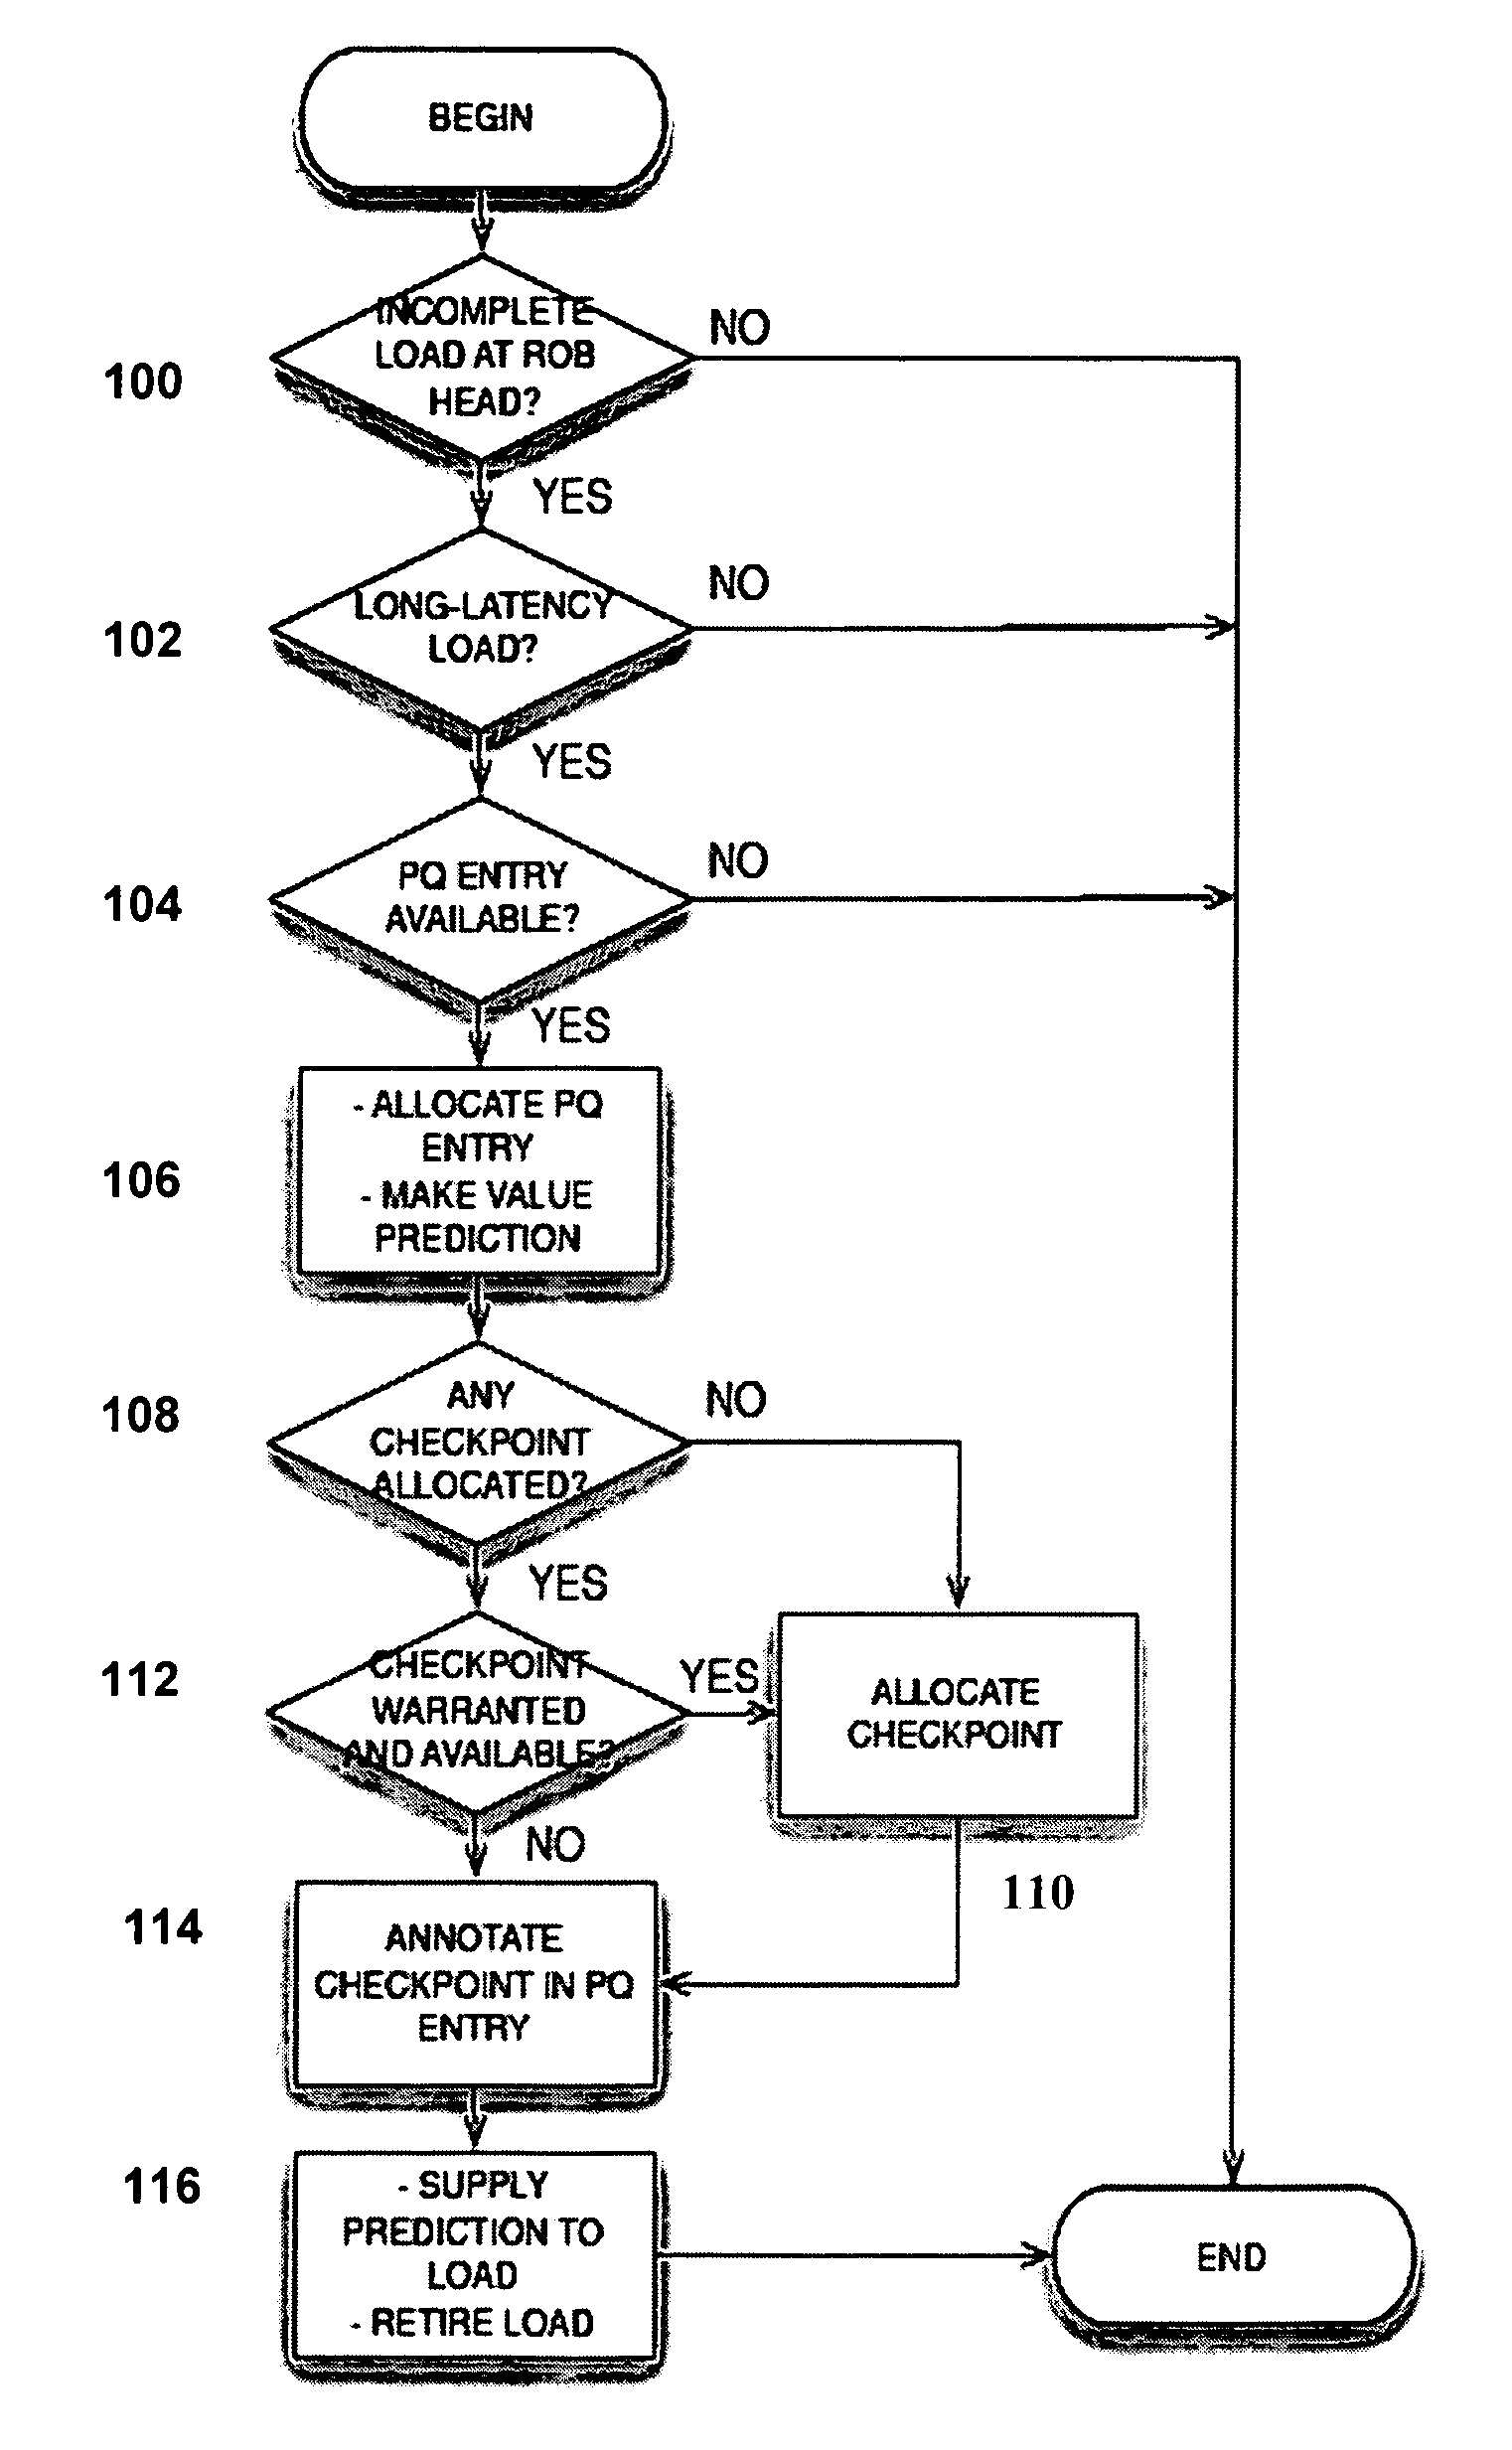 Method and apparatus for early load retirement in a processor system